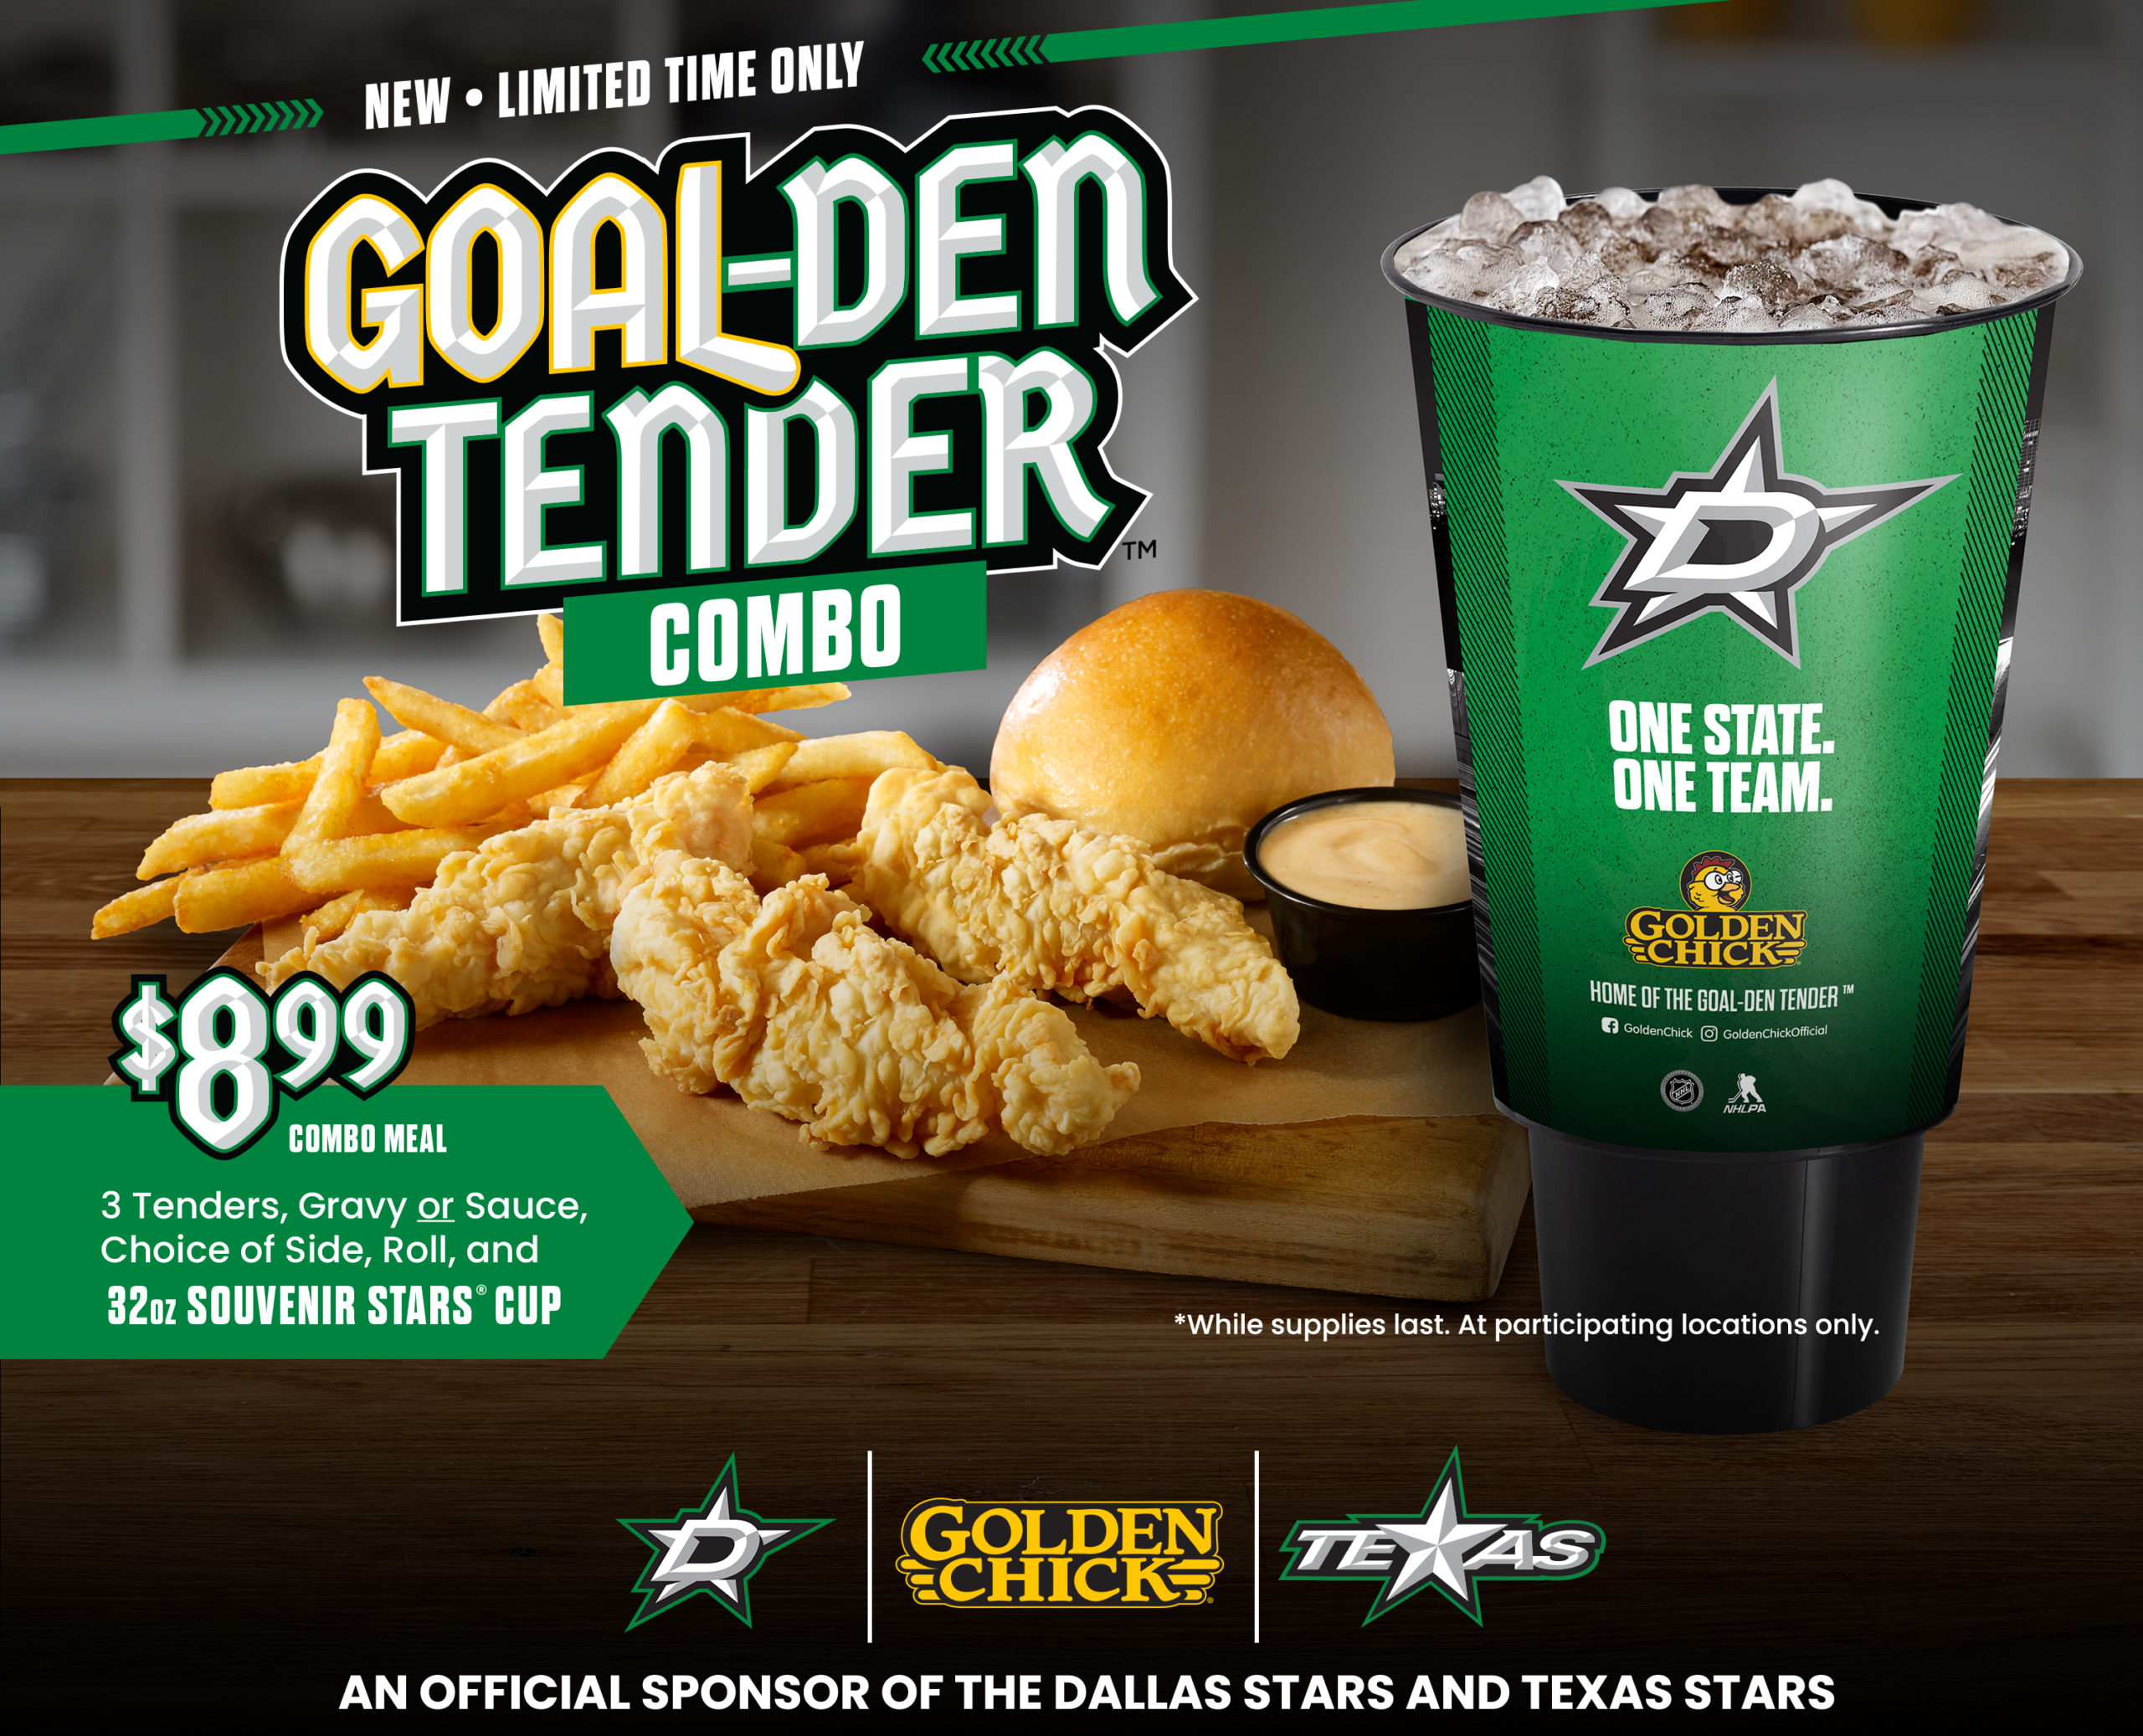 New - limited time only. Goal-den tender combo. $8.99 combo meal. 3 tenders, gravy or sauce, choice of side, roll, and 32 ounce souvenir Stars cup. While supplies last. At participating locations only. PROUD Sponsor of the Dallas and Texas Stars